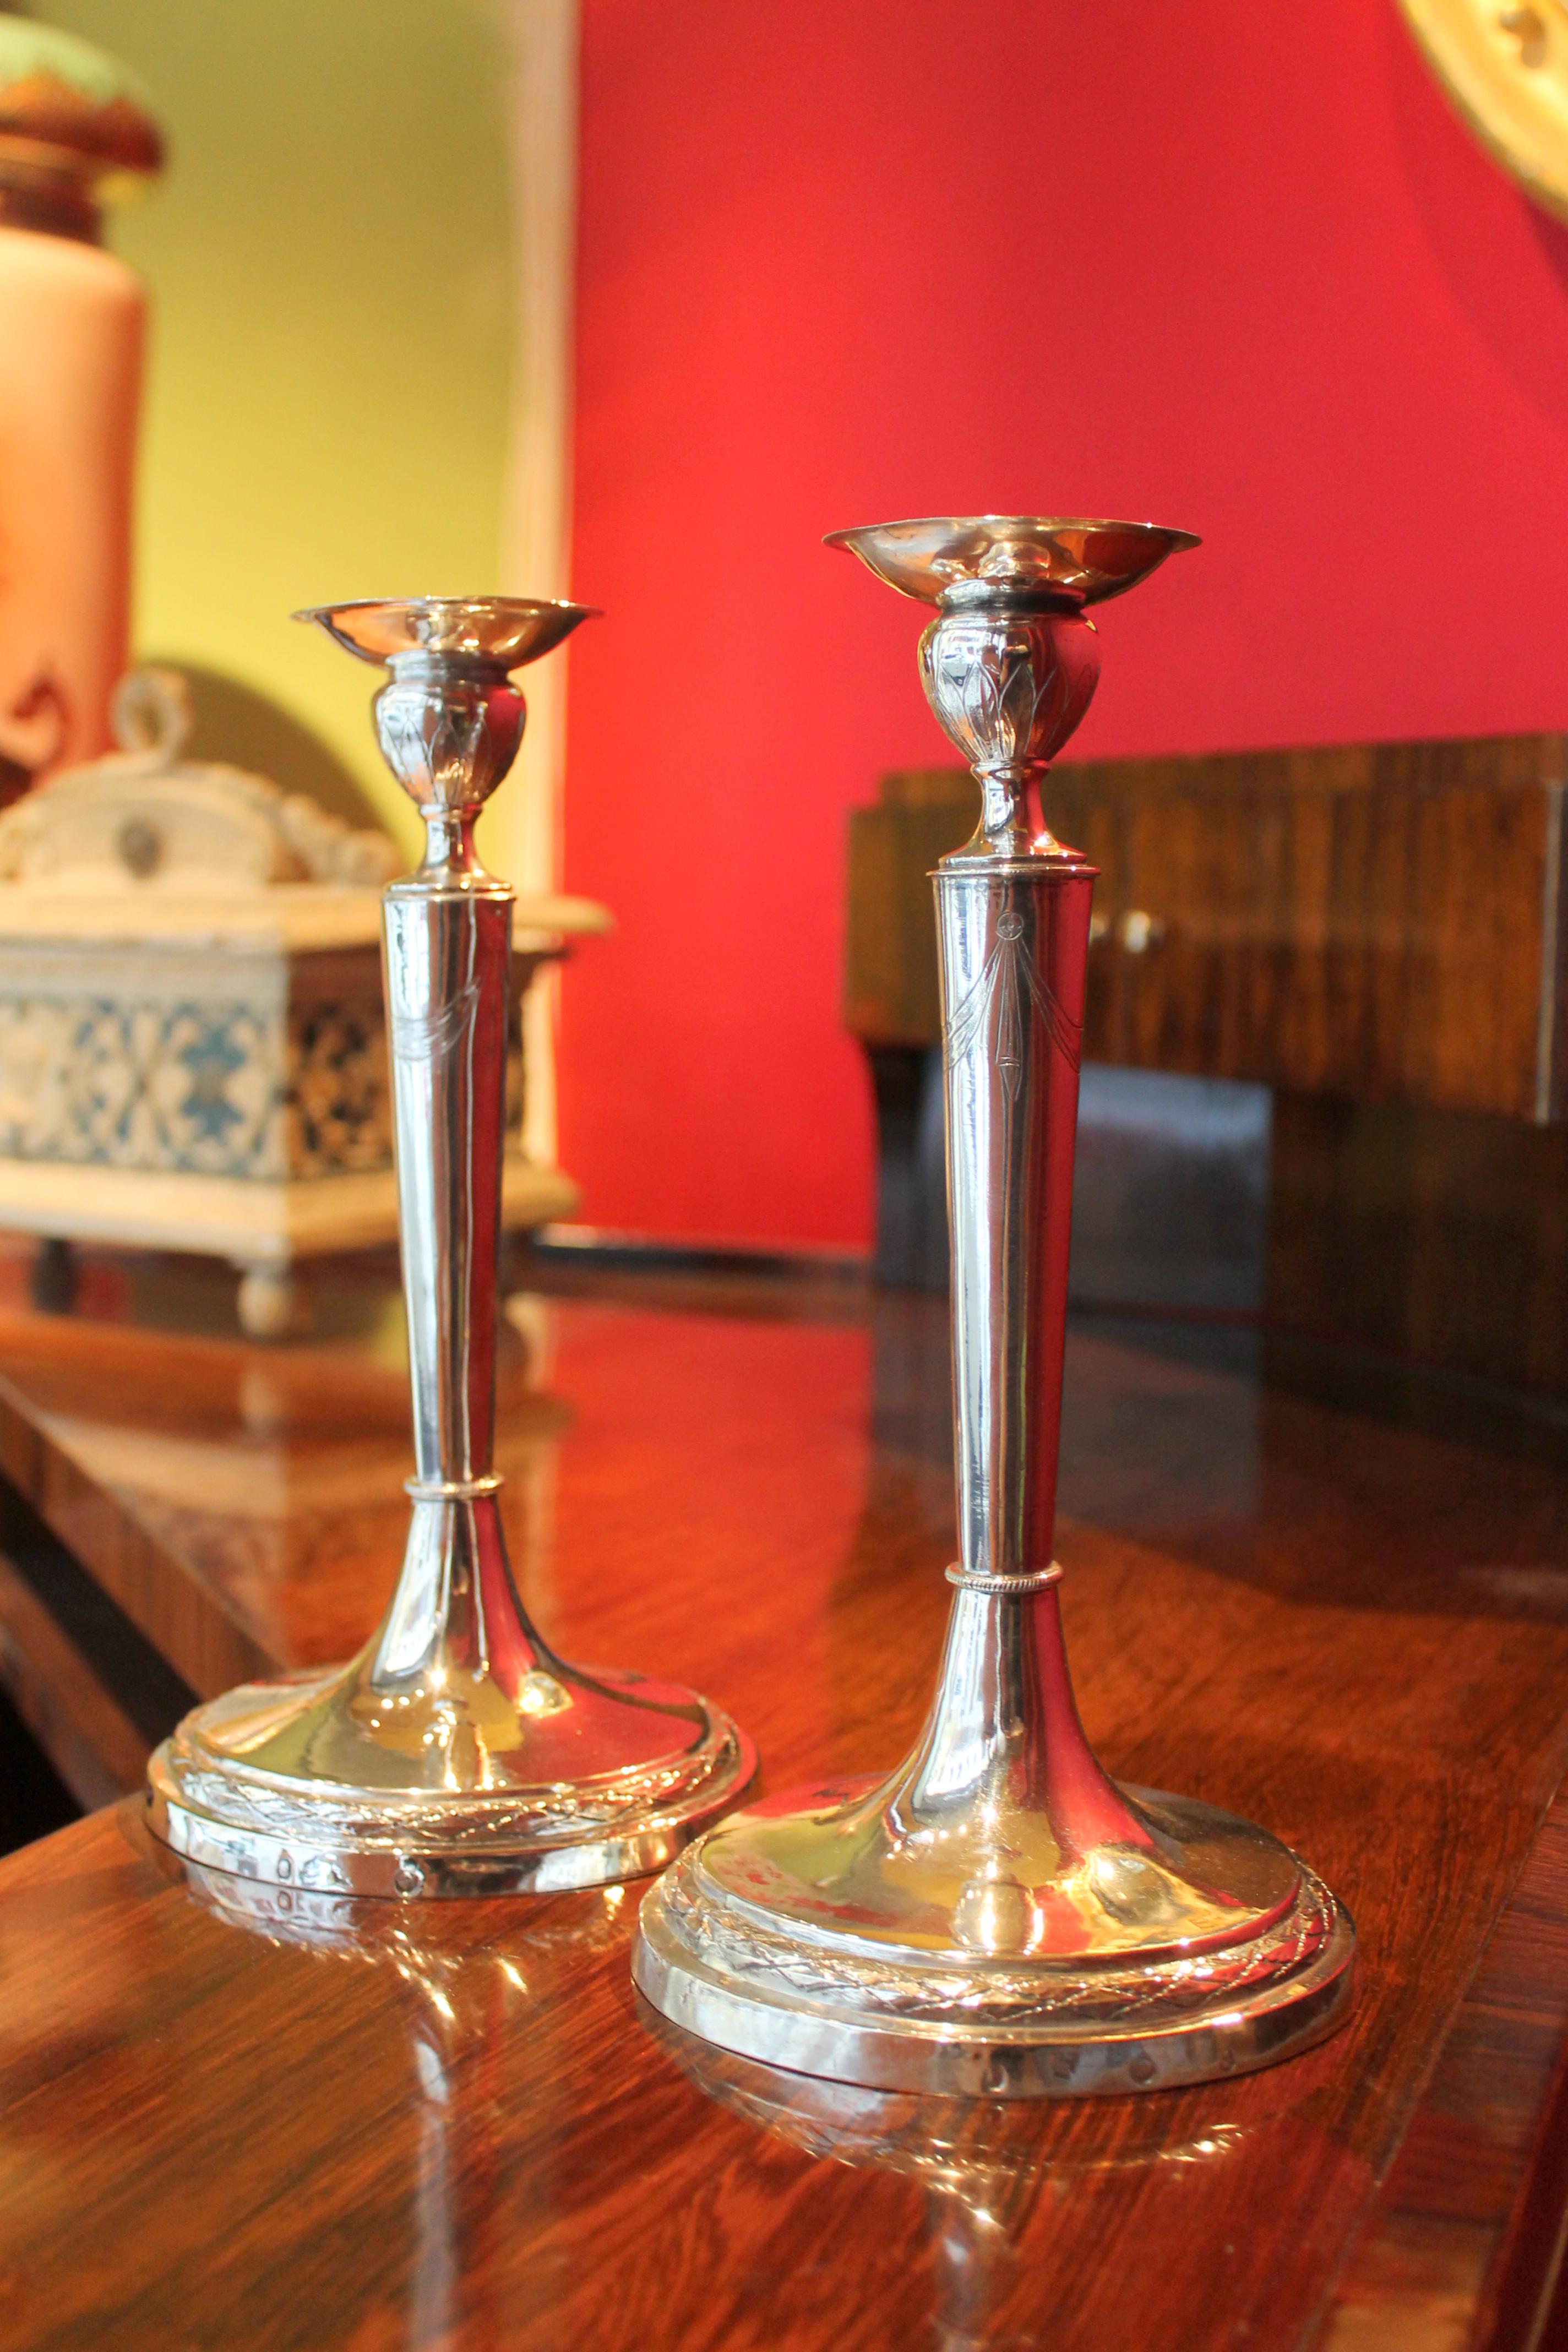 This pair of elegant 19th century Italian Empire period (1811-1817) silver chiseled candlesticks show a simple but elegant design and shape. 
The conical structure embellished with festoon and garlands rests on an unfilled round base decorated with